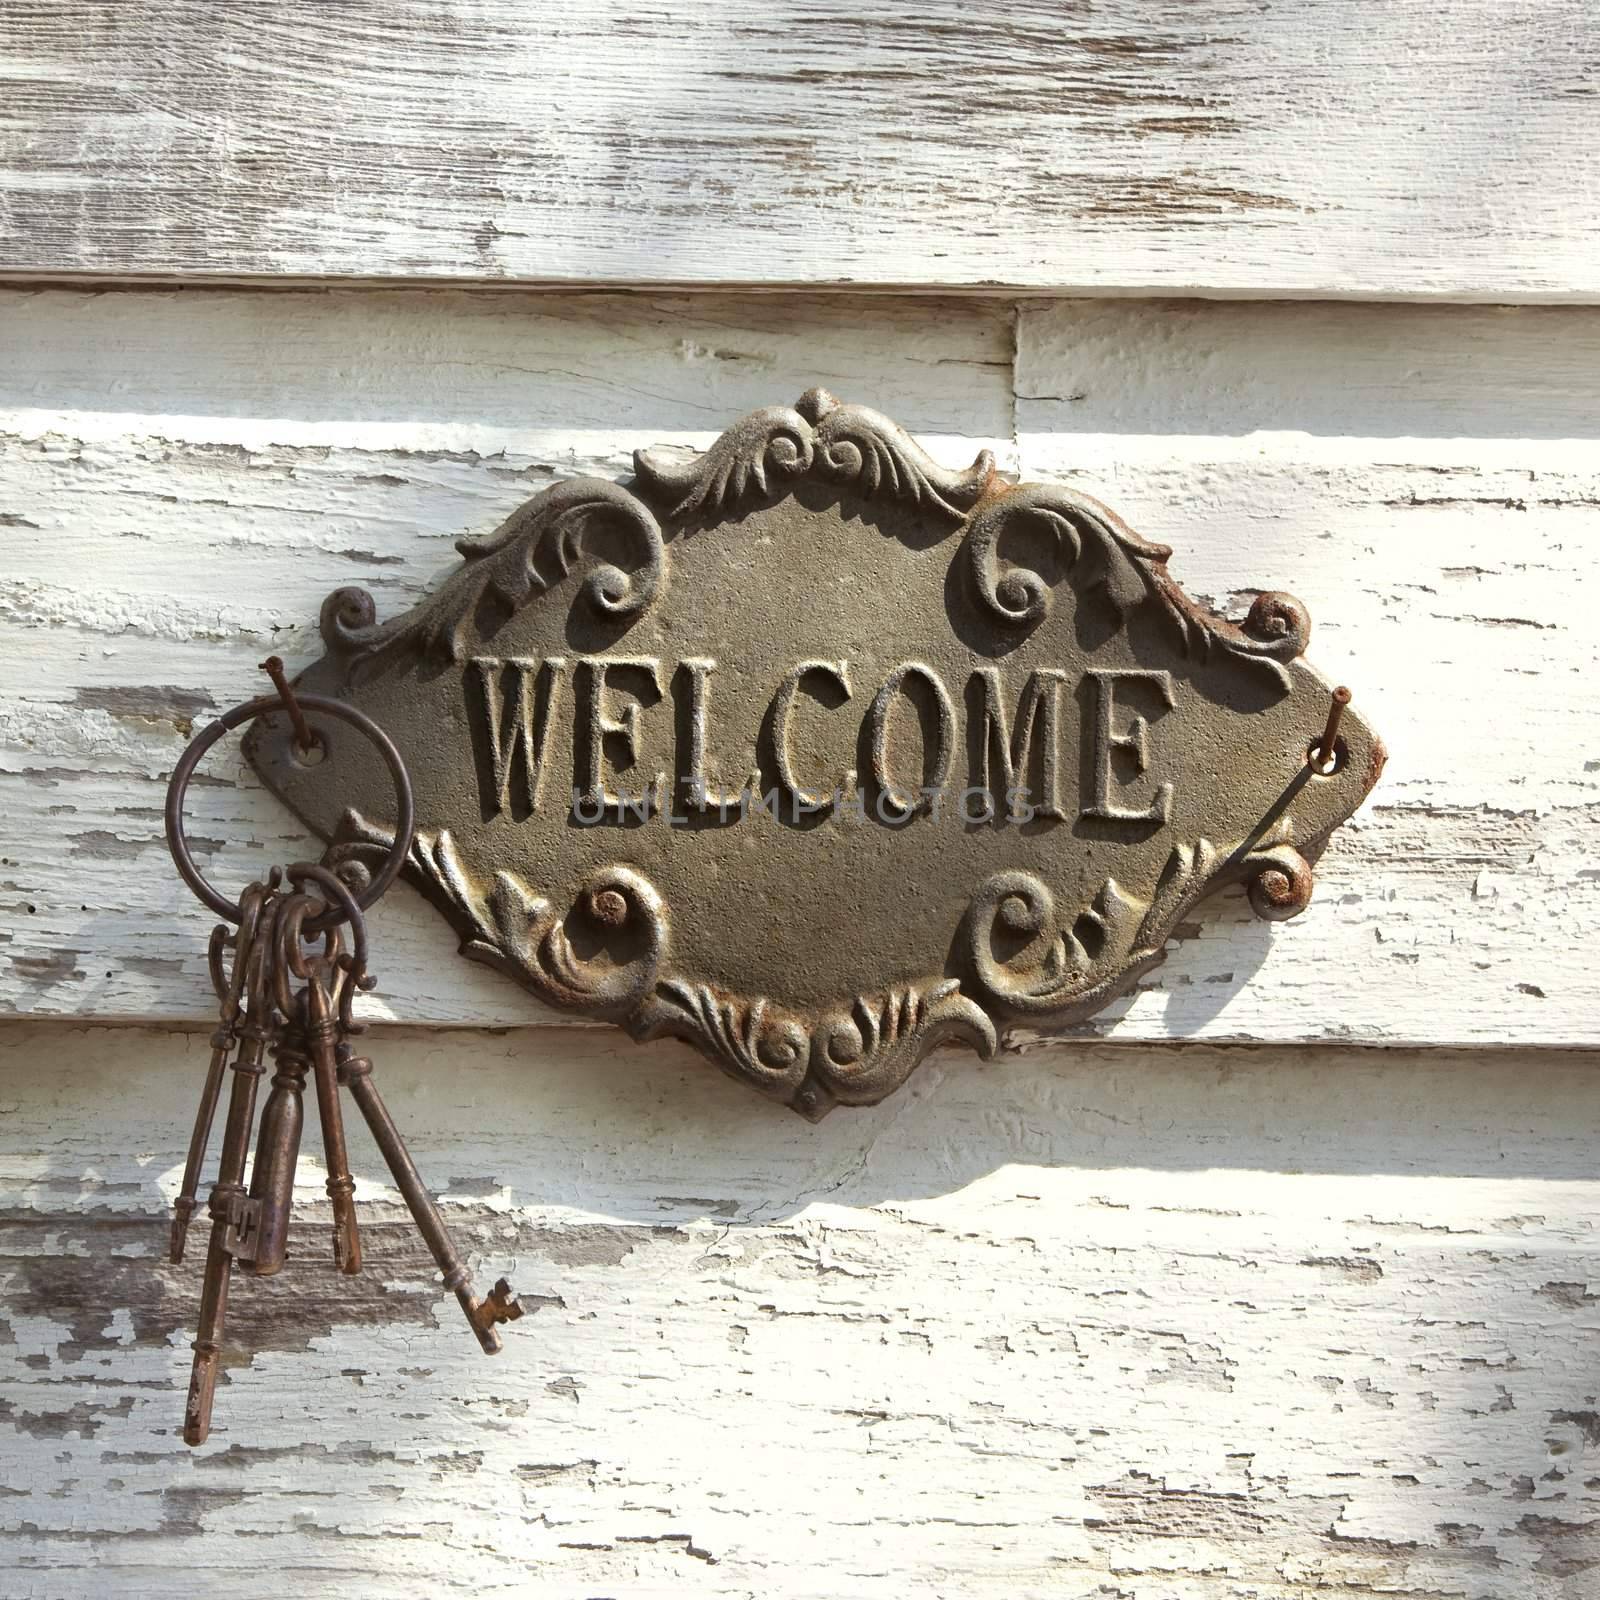 Welcome sign and metal keys on old white peeling building.